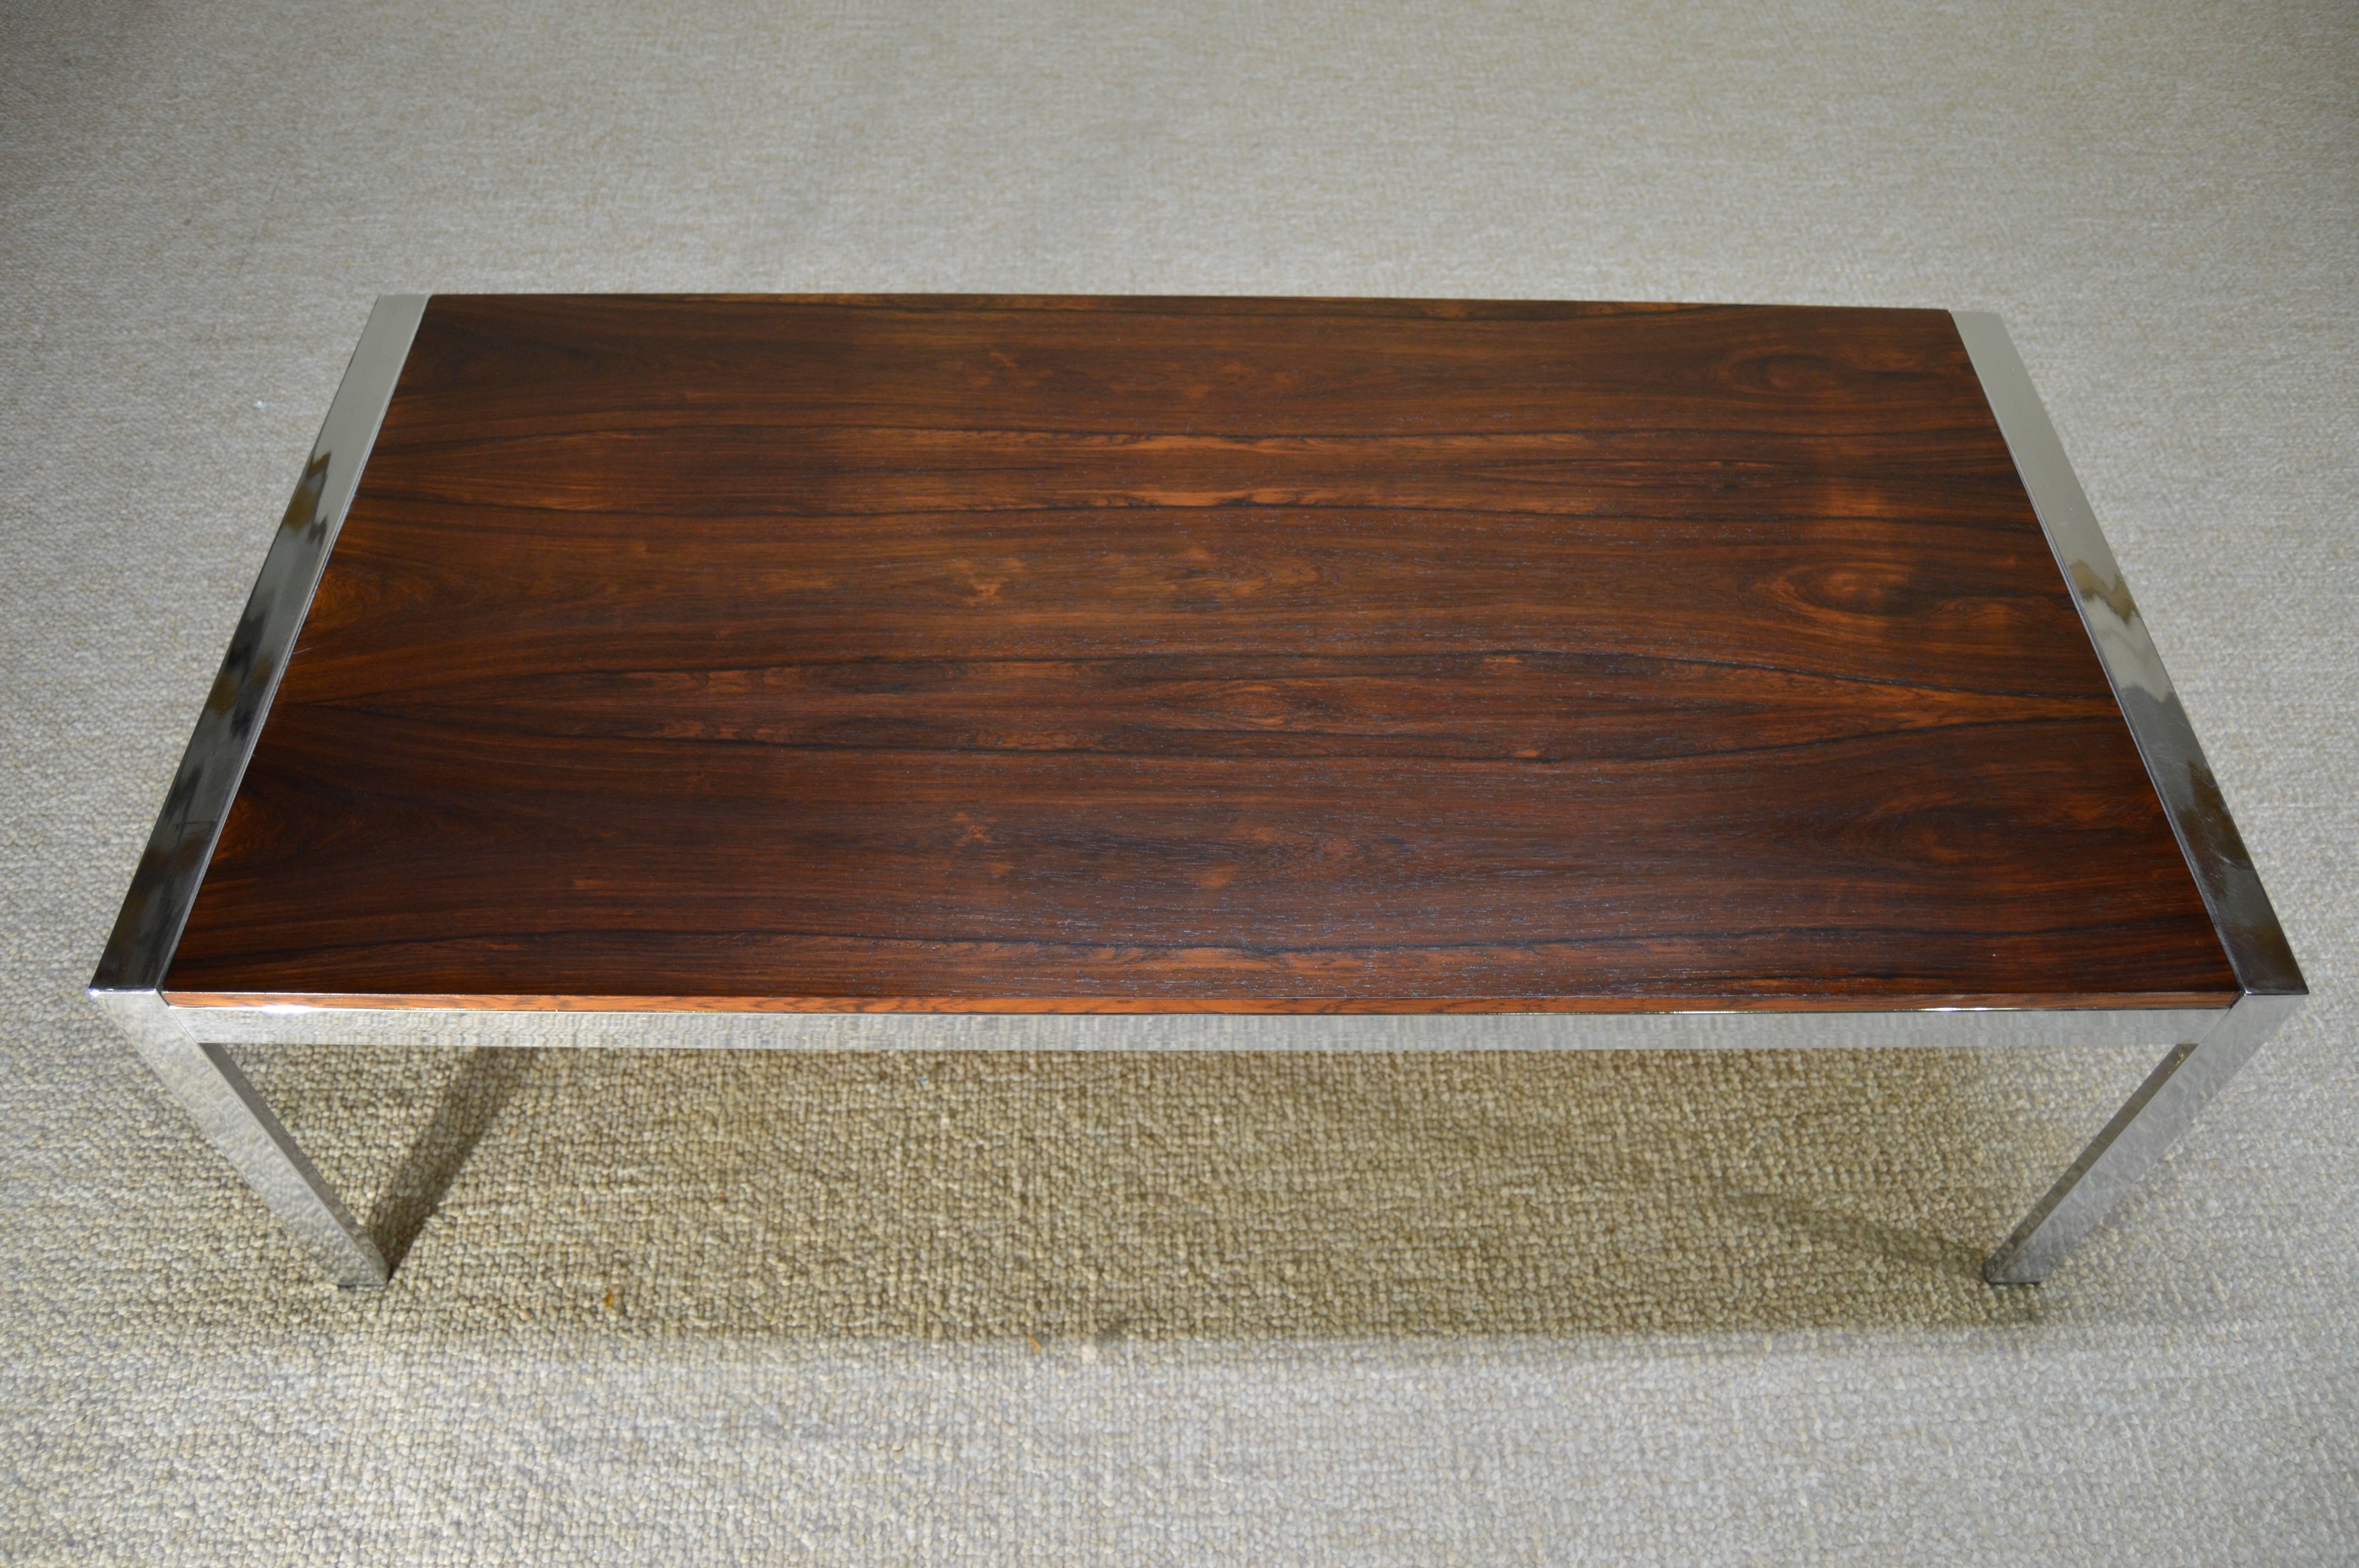 Howard Miller rosewood and chrome coffee table produced by MDA in Sussex, England in the 1960s. Beautiful vintage condition.